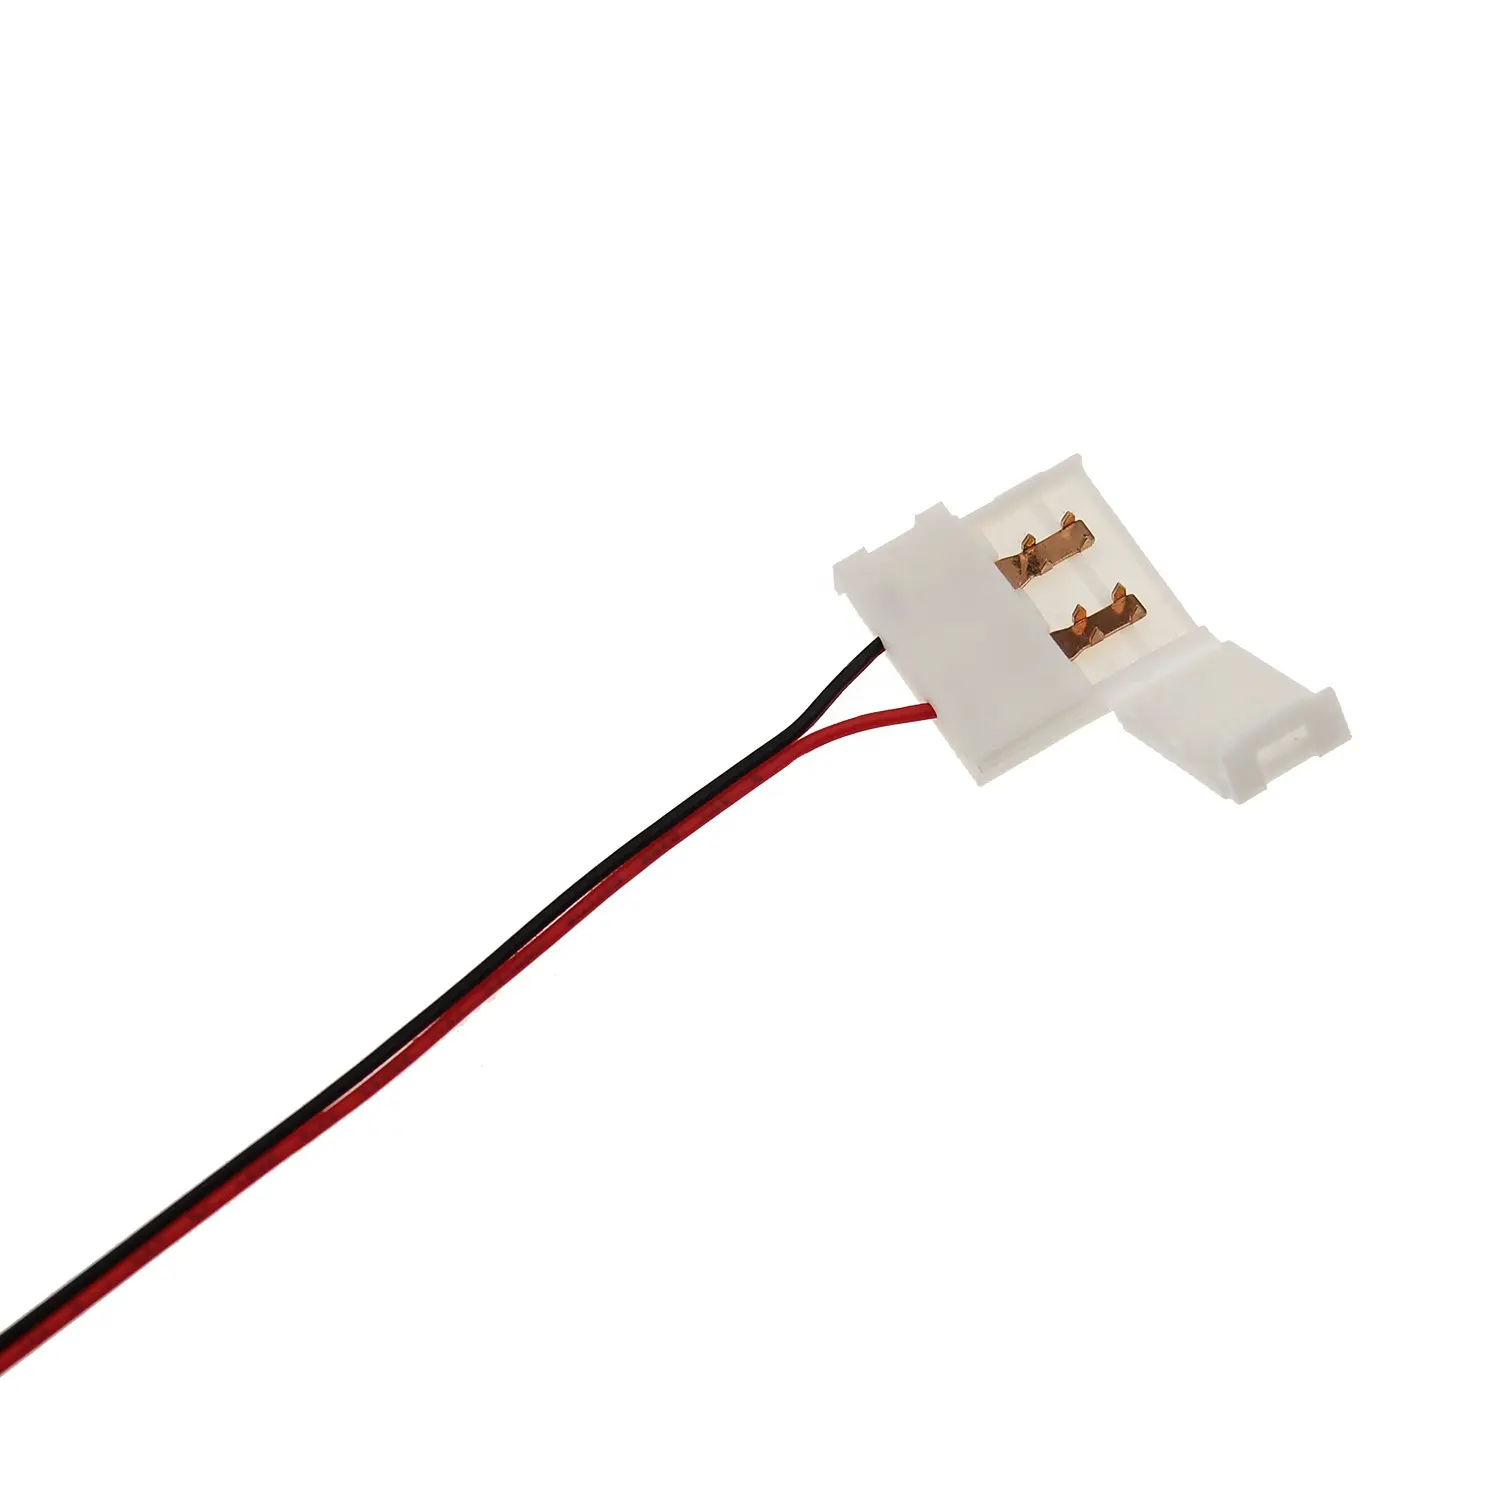 Super wide 28mm 2Pin flat cable quick connector solderless led strip connector with wire